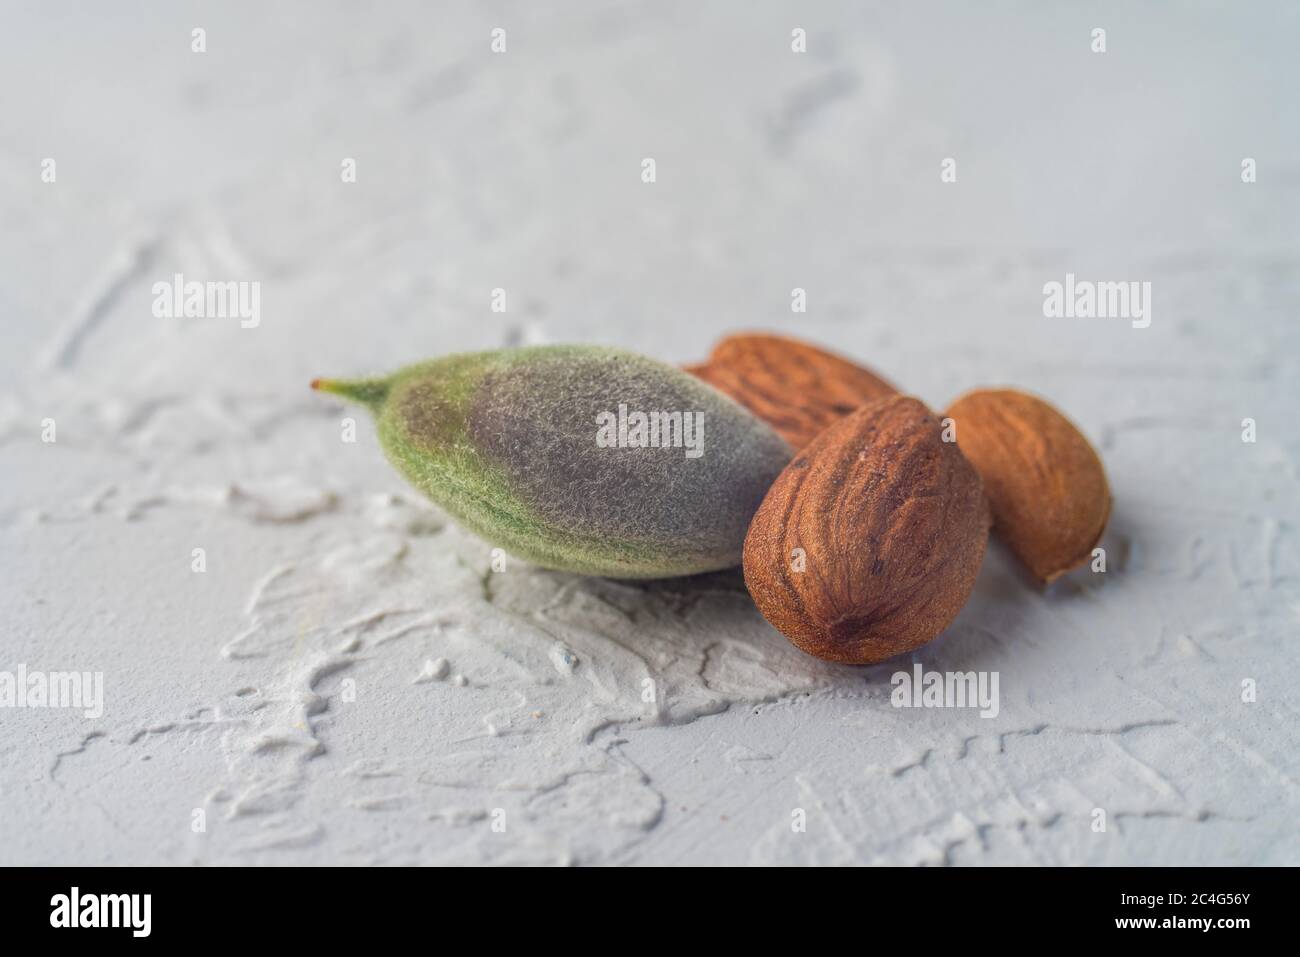 green and old riped almonds nut on spring, isolated on white textured background. Copy space. Balanced diet vegan healthy lifestyle concept. Creative Stock Photo